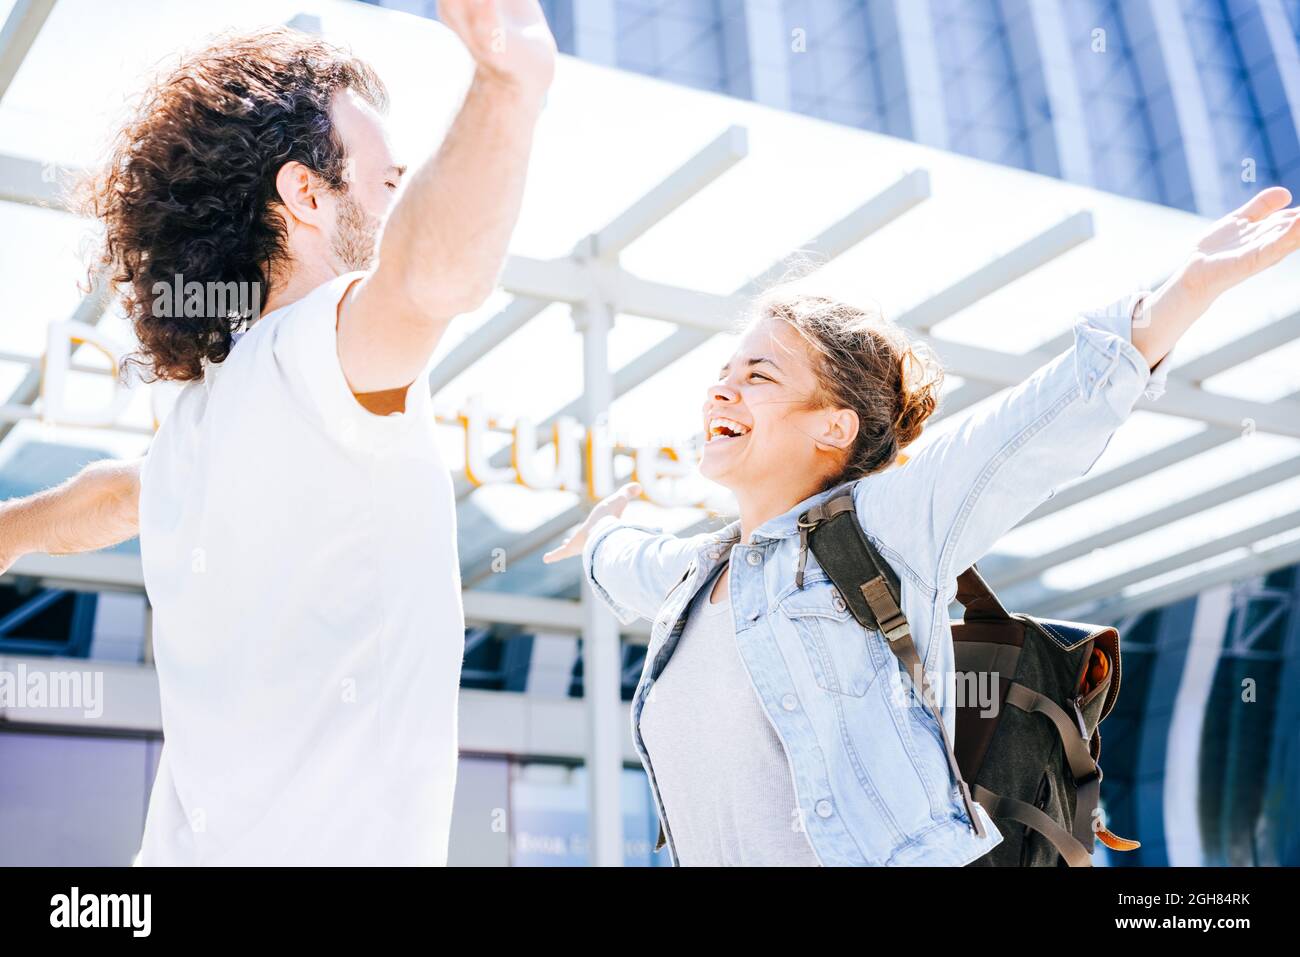 Happy interracial couple at the airport. Husband waving and raising hands in salute meeting wife after business trip and embracing at departure area Stock Photo